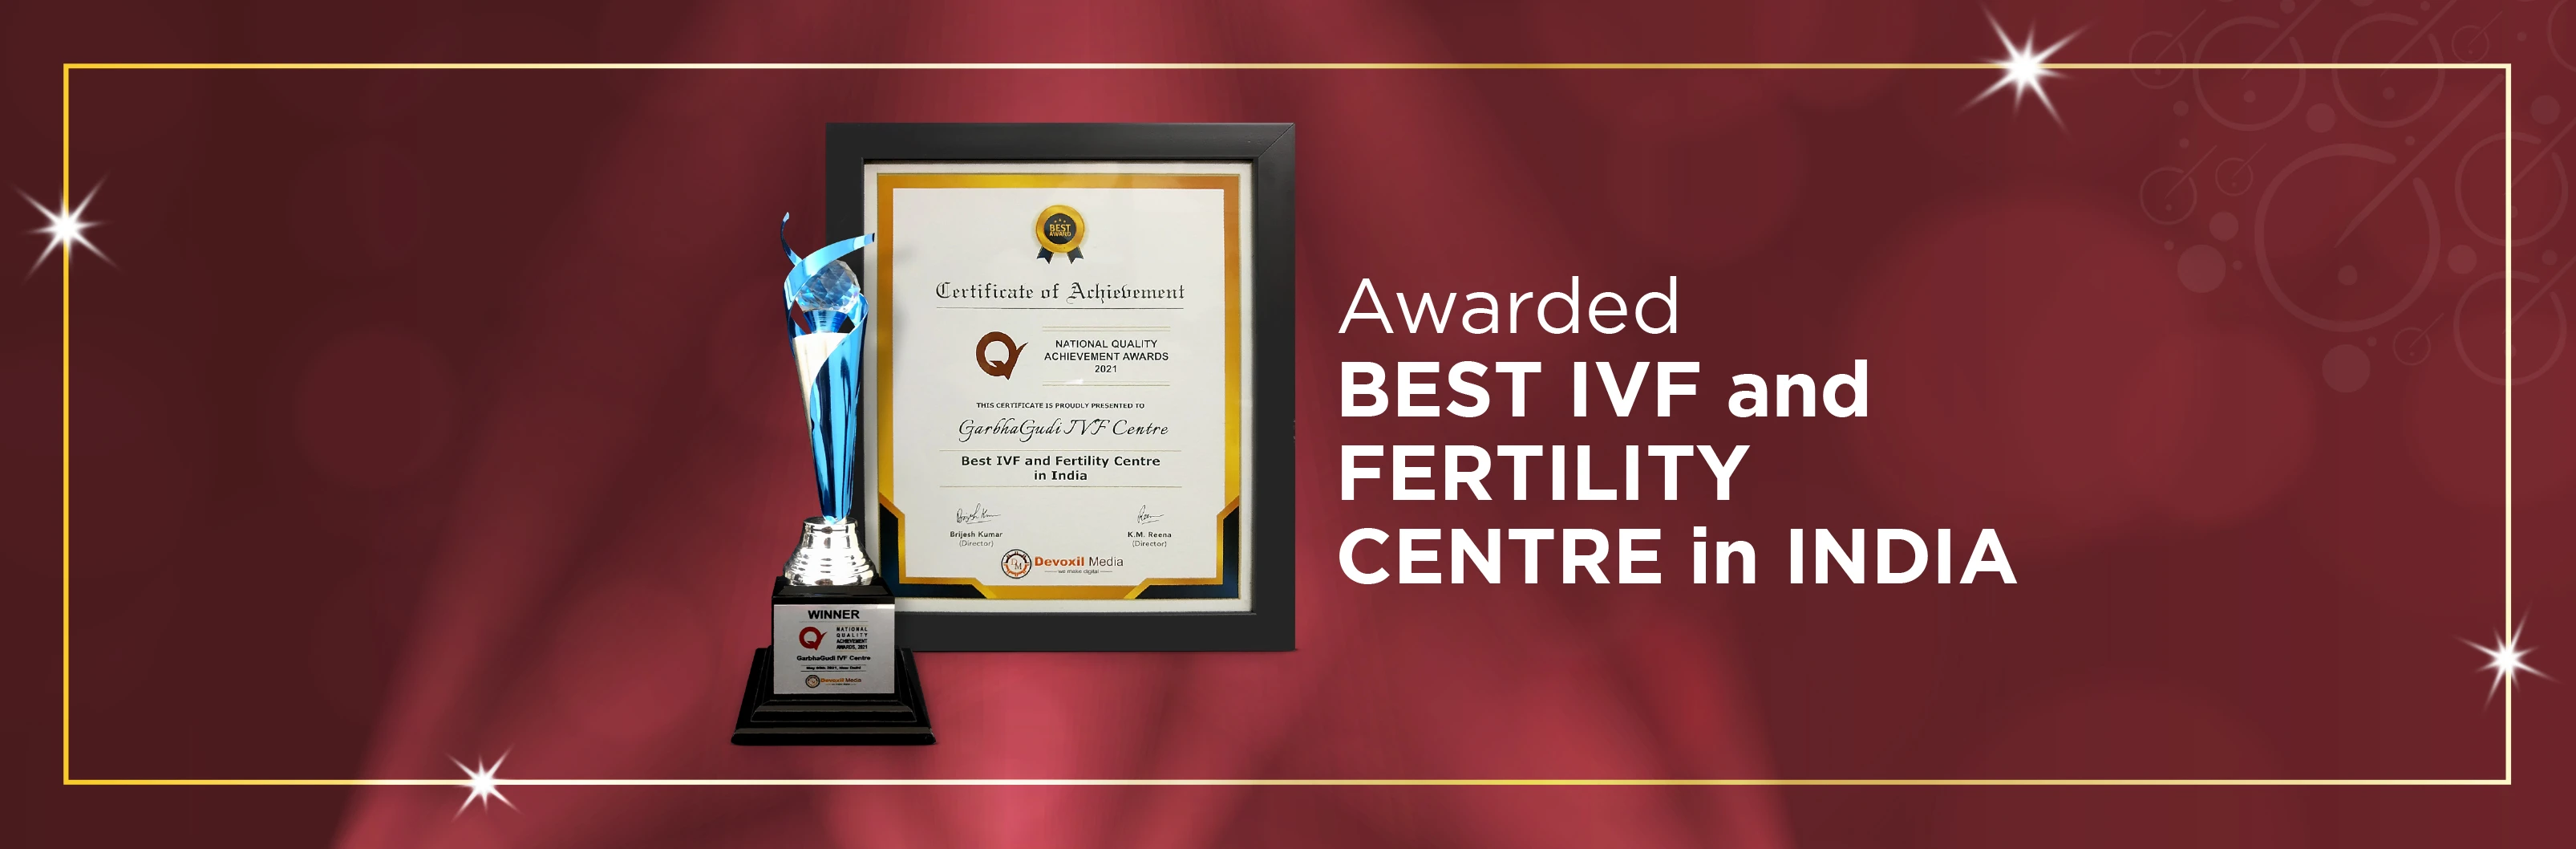 Best IVF and Fertility Hospital in India